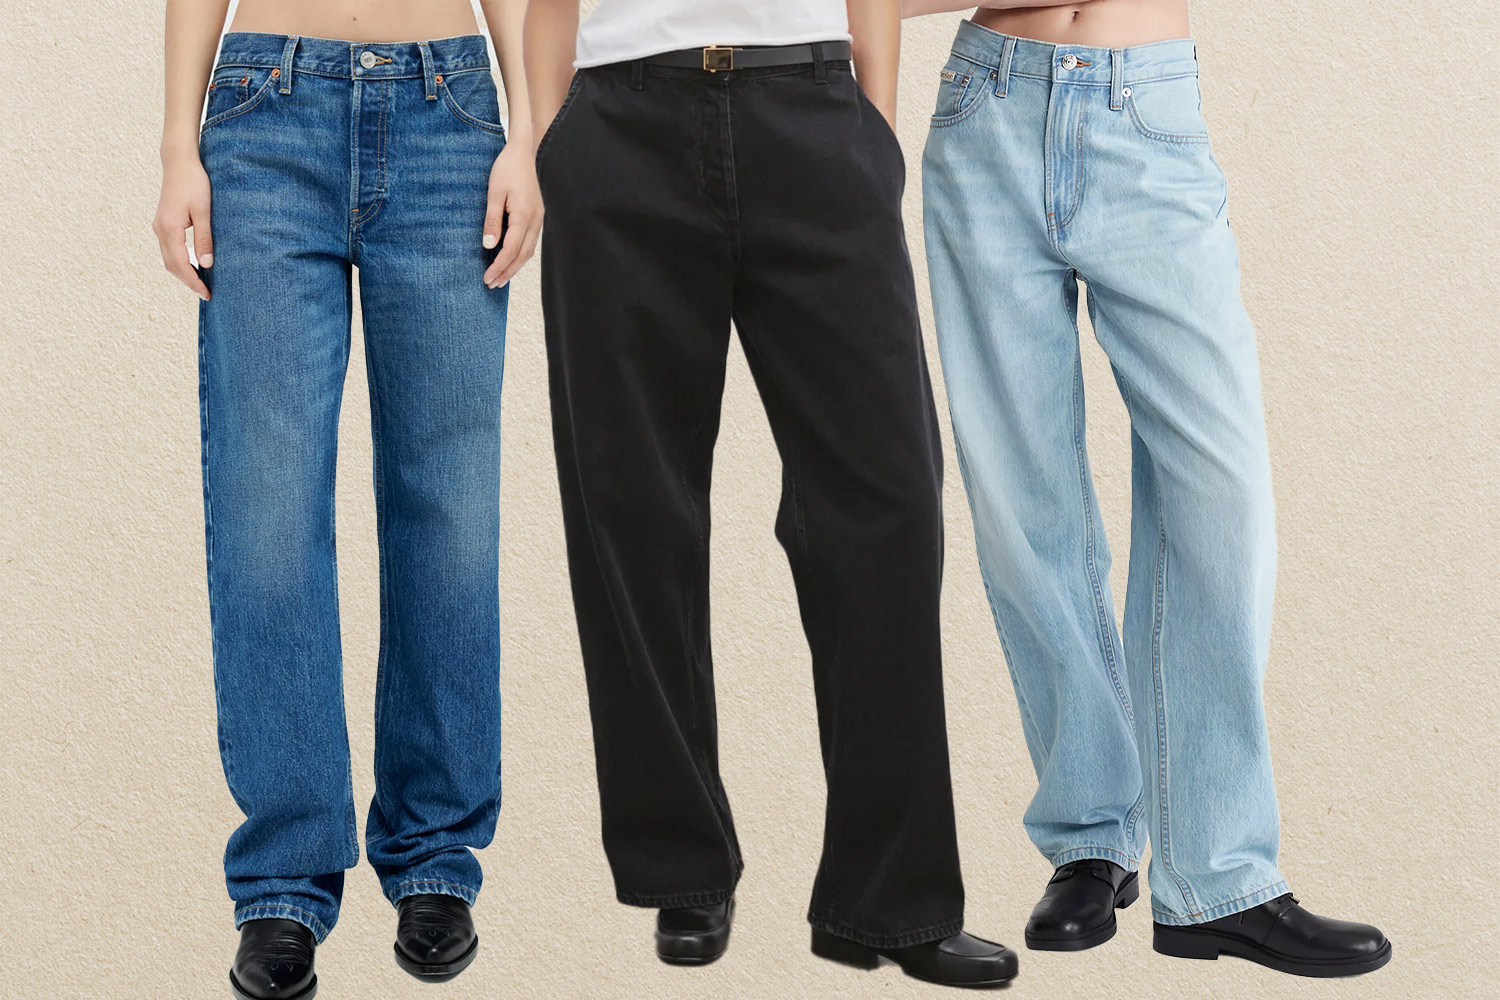 Cutouts of three women modeling a medium wash, black, and light pair of jeans on beige background